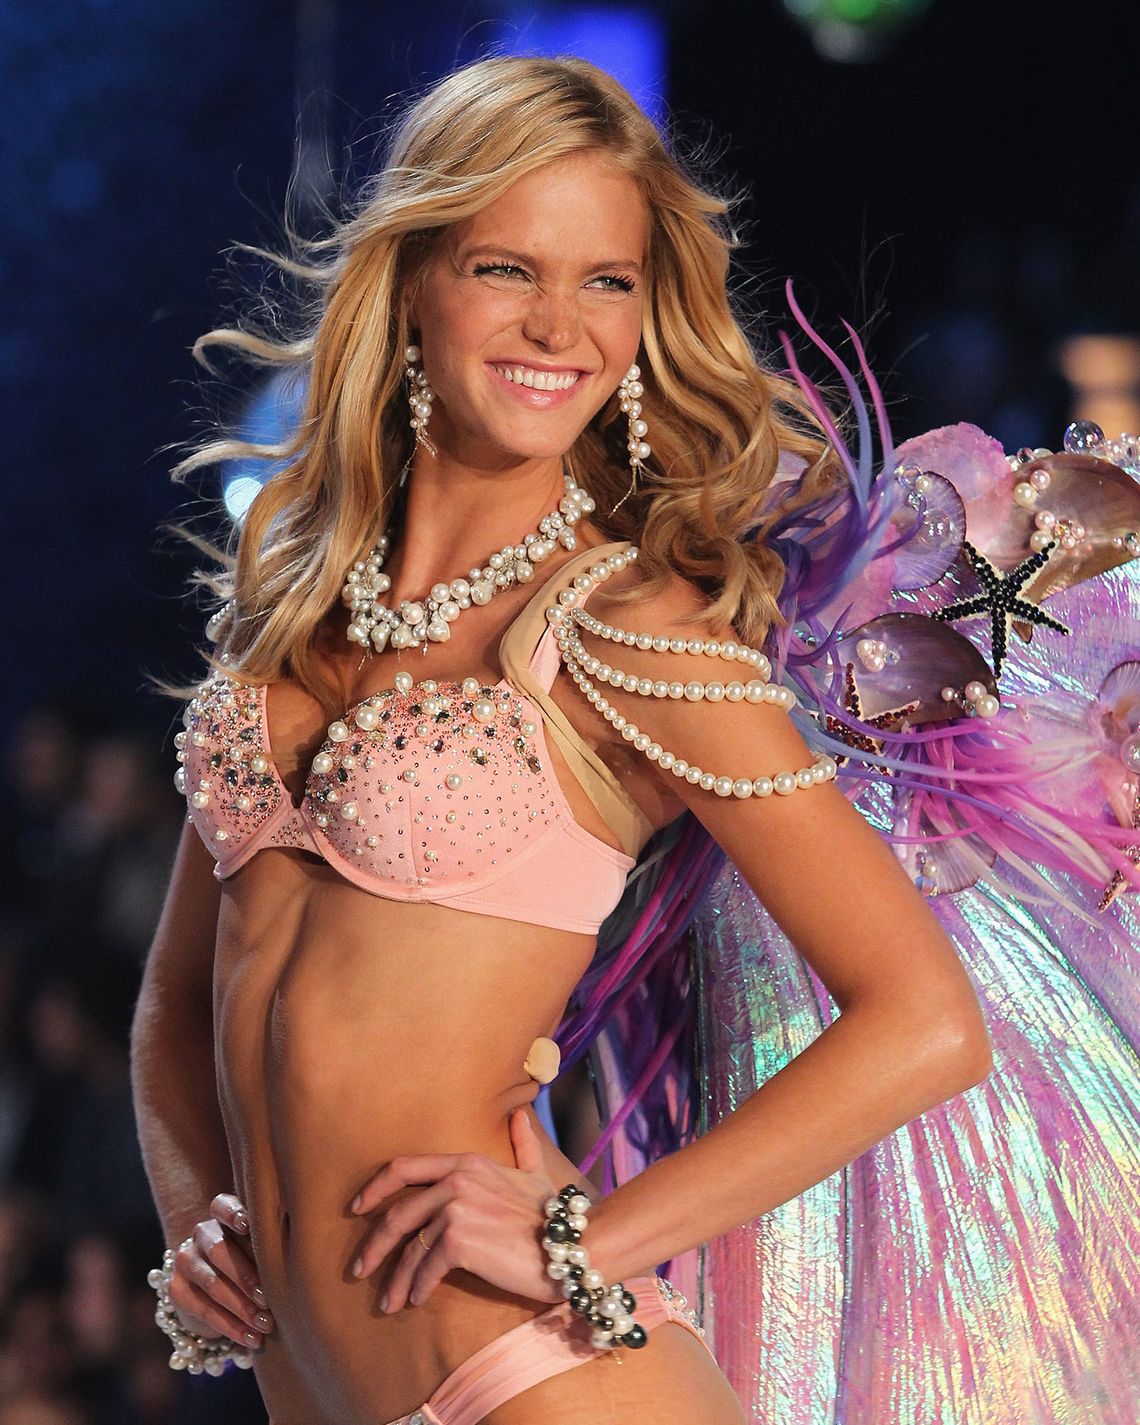 Victoria's Secret Angel waves in pictures - how to copy their hairstyle